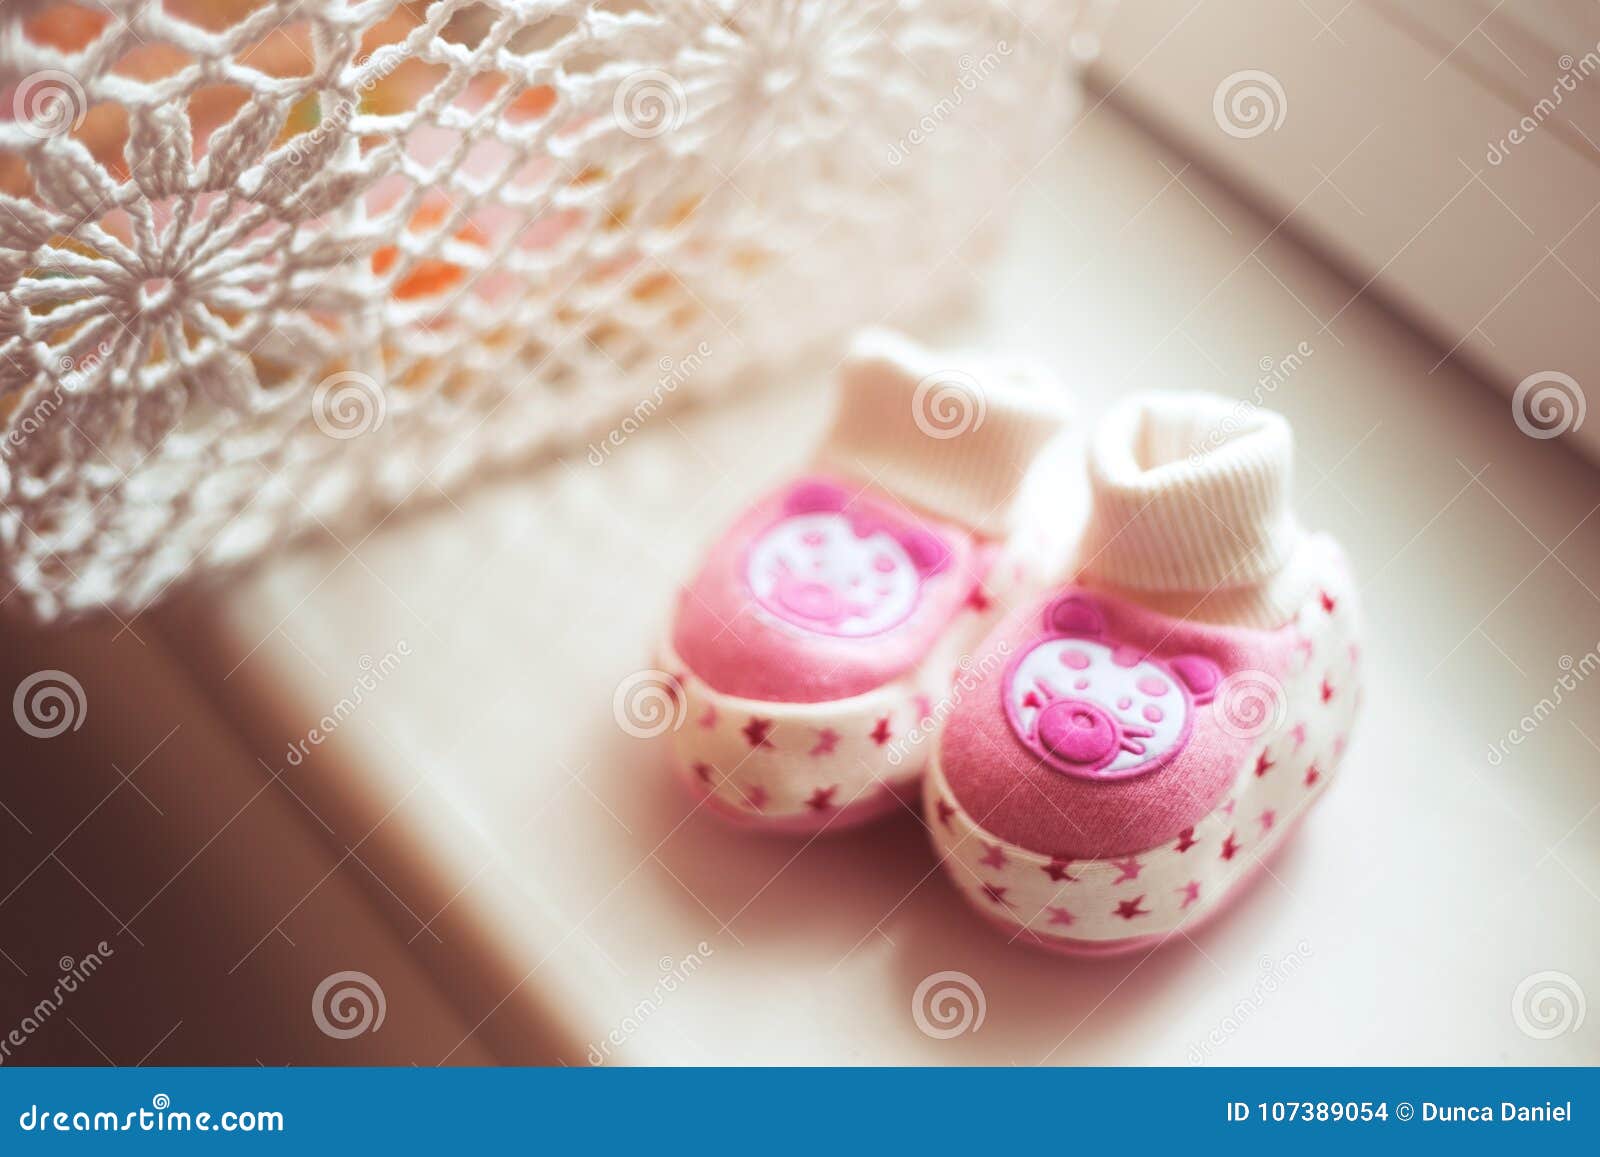 baby shoes for newborn